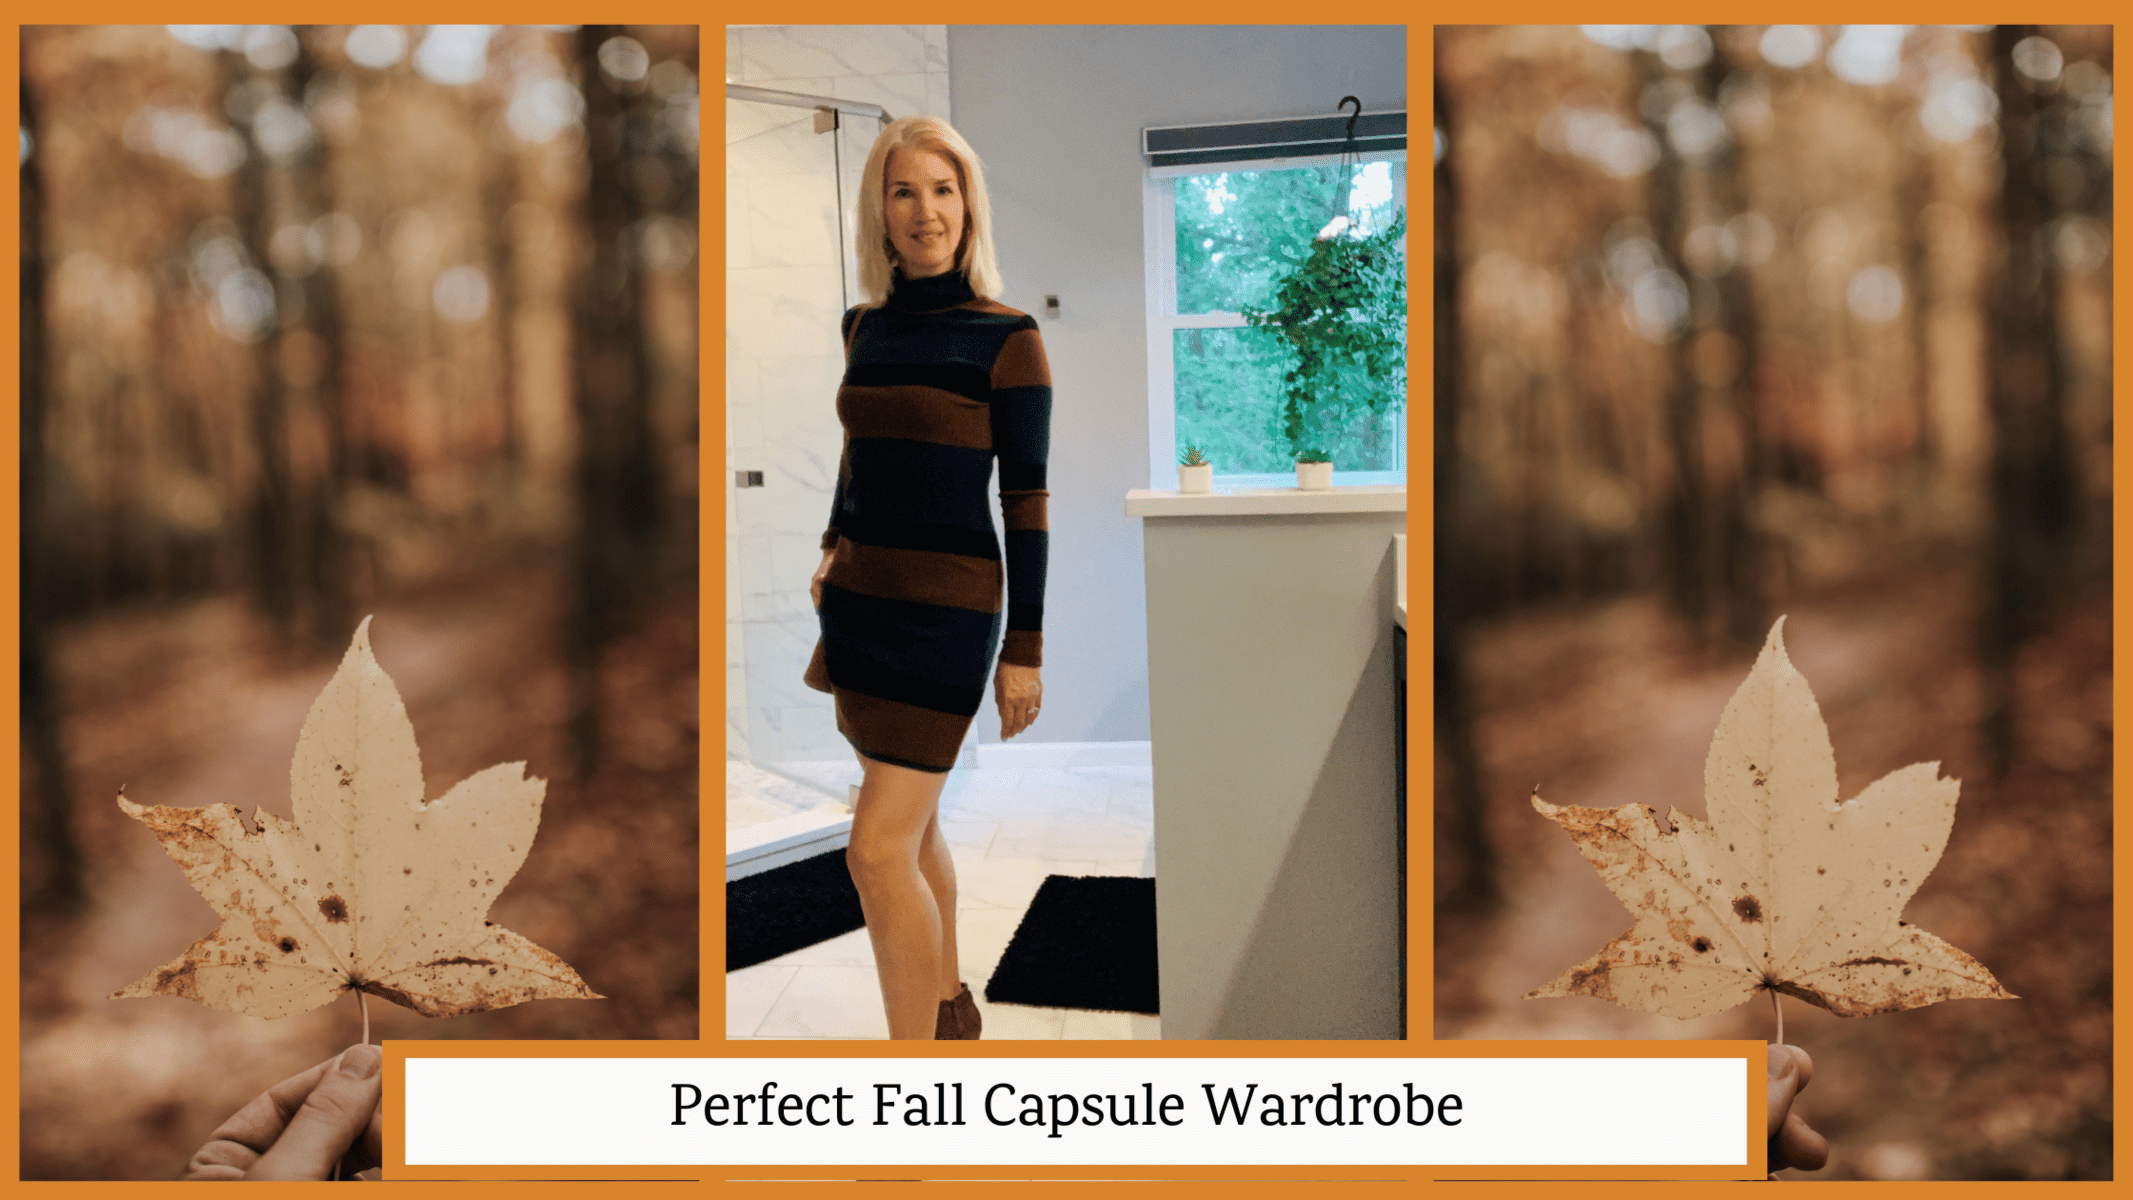 Photos of fall leaves and a woman wearing a fall sweater dress.